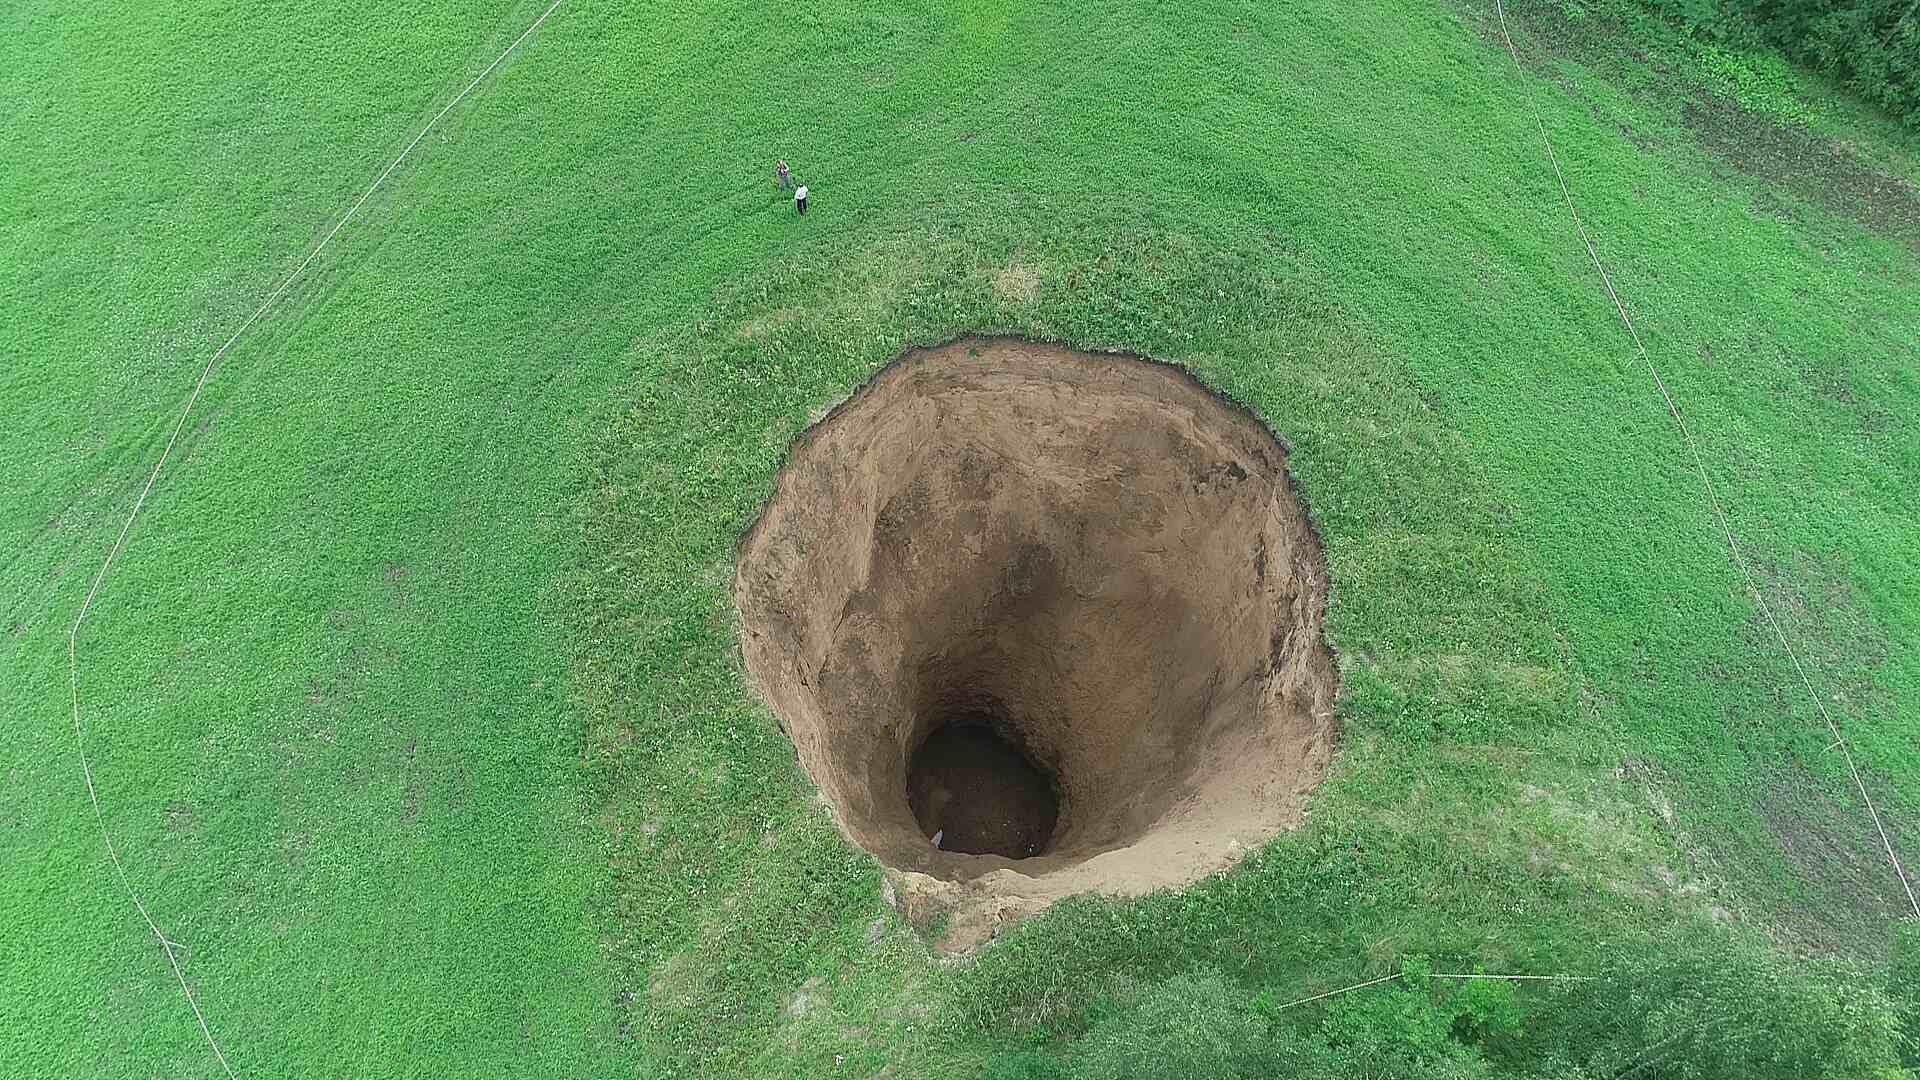 Other hole